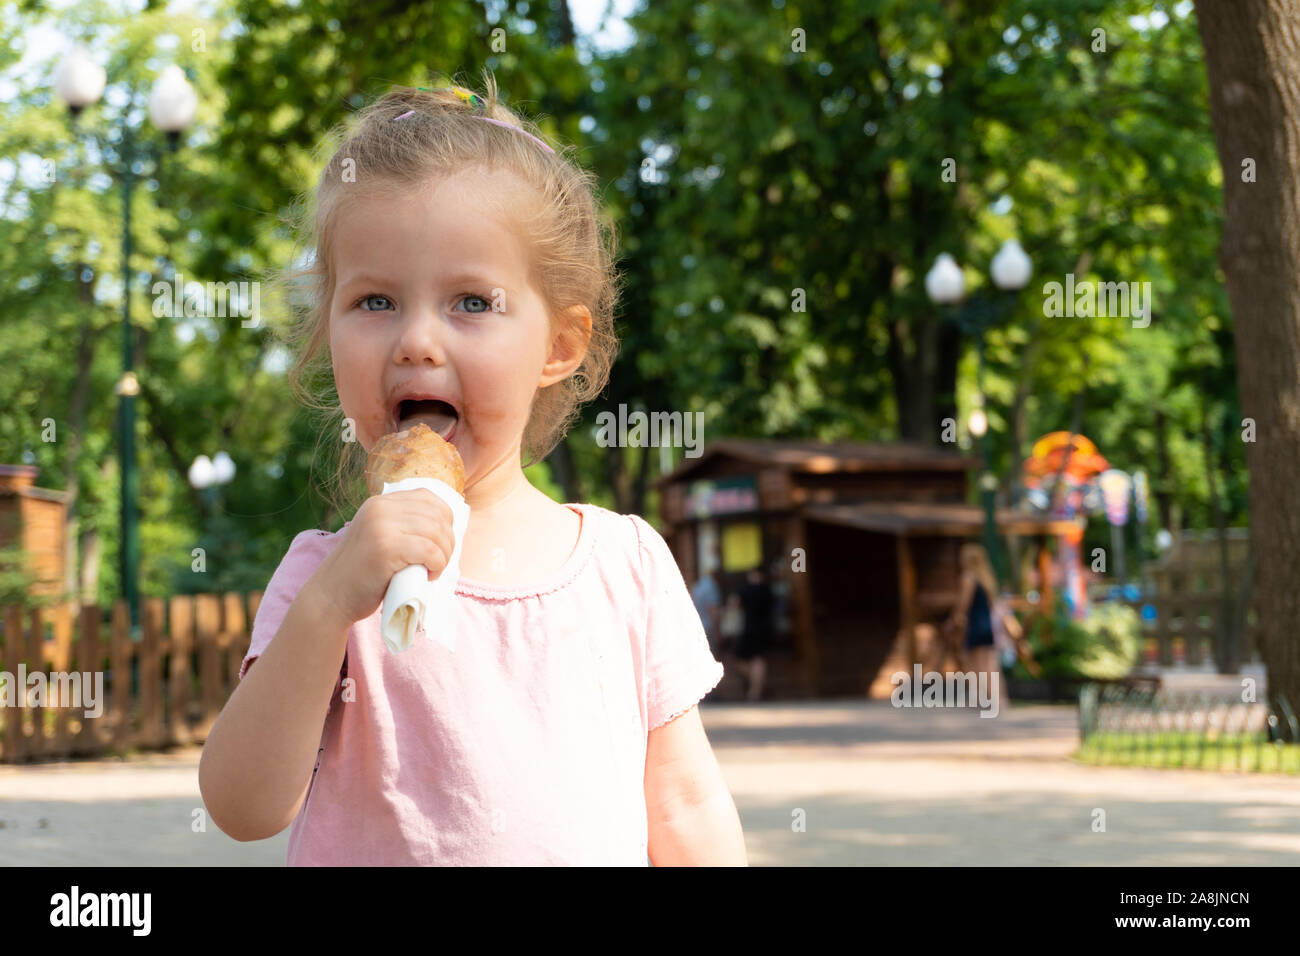 Girl kid eating an ice cream in the park Stock Photo